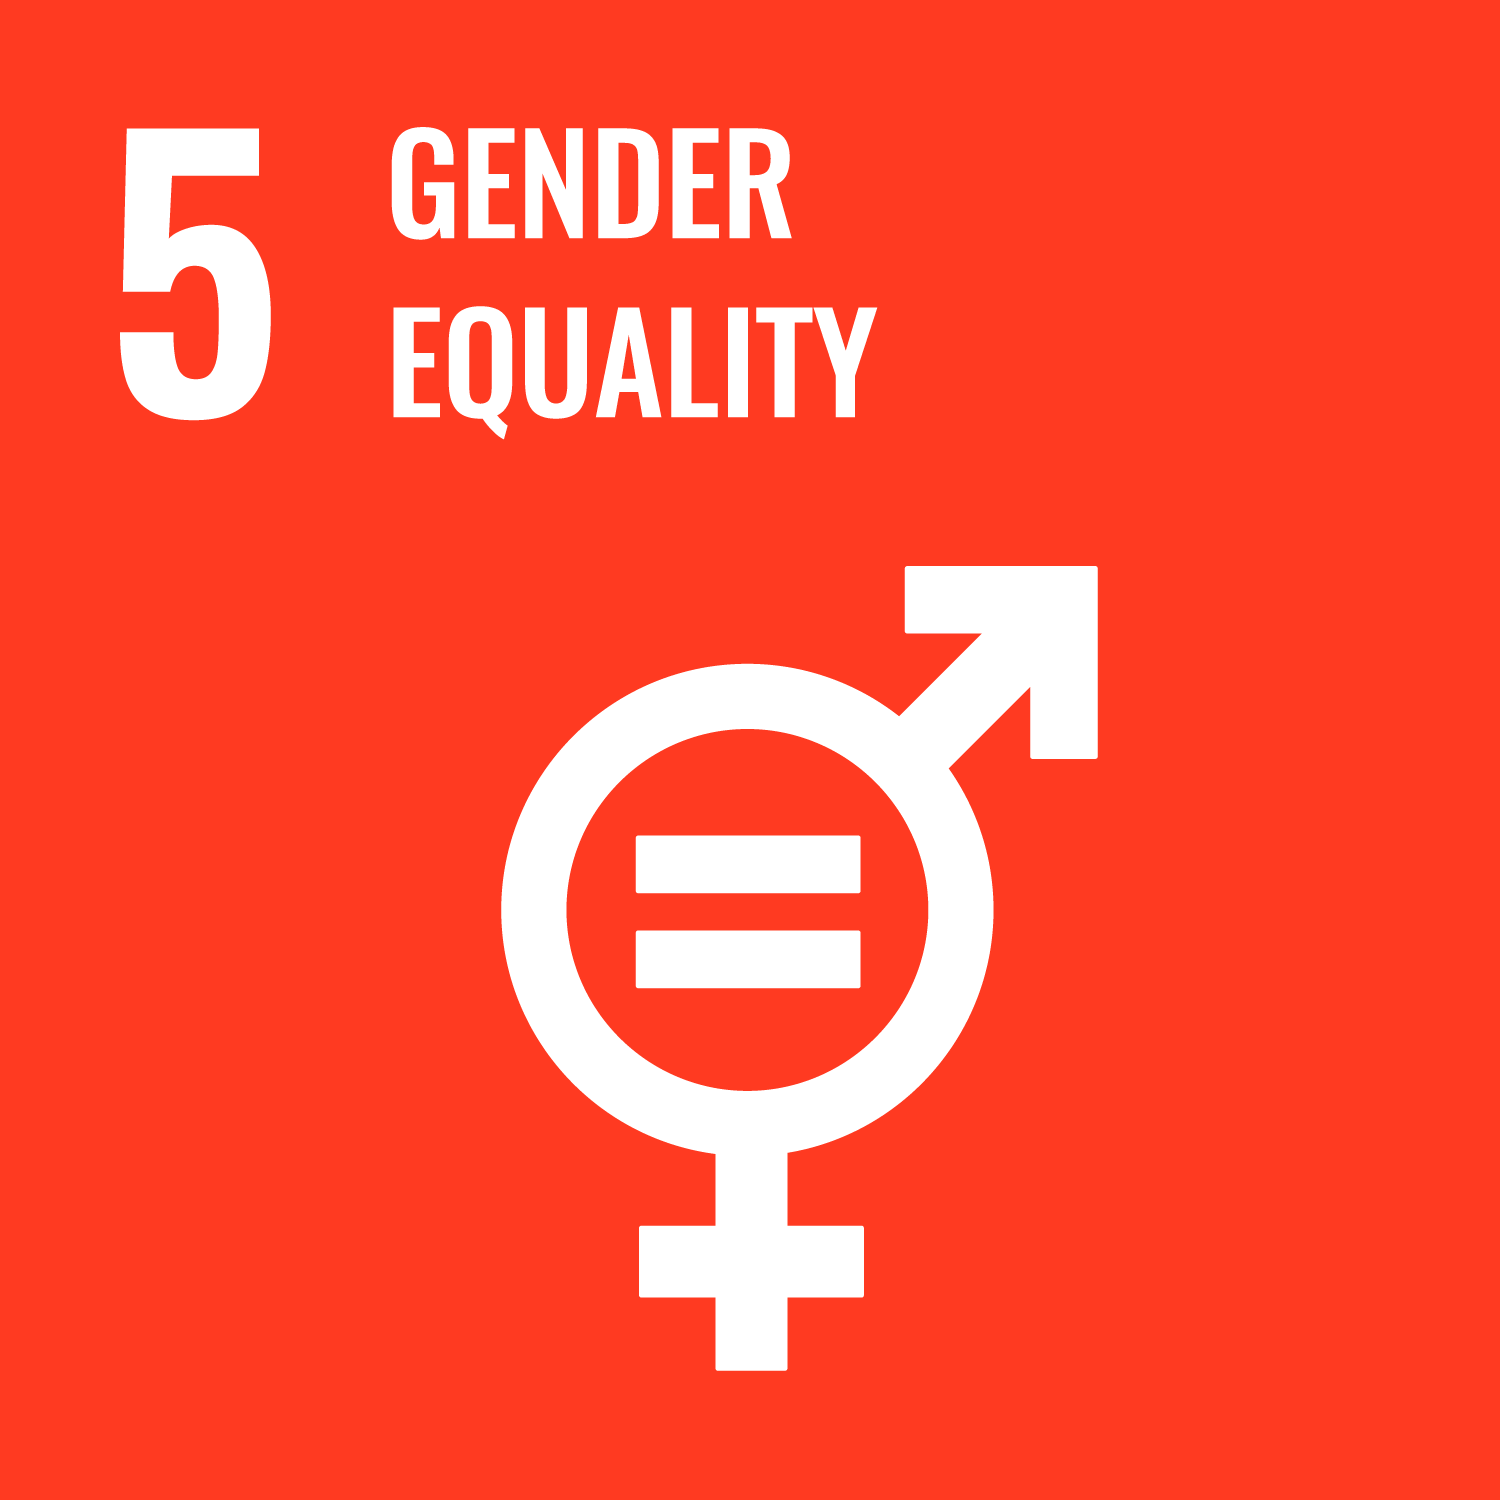 Transformative Financing for Gender Equality and Women’s Empowerment